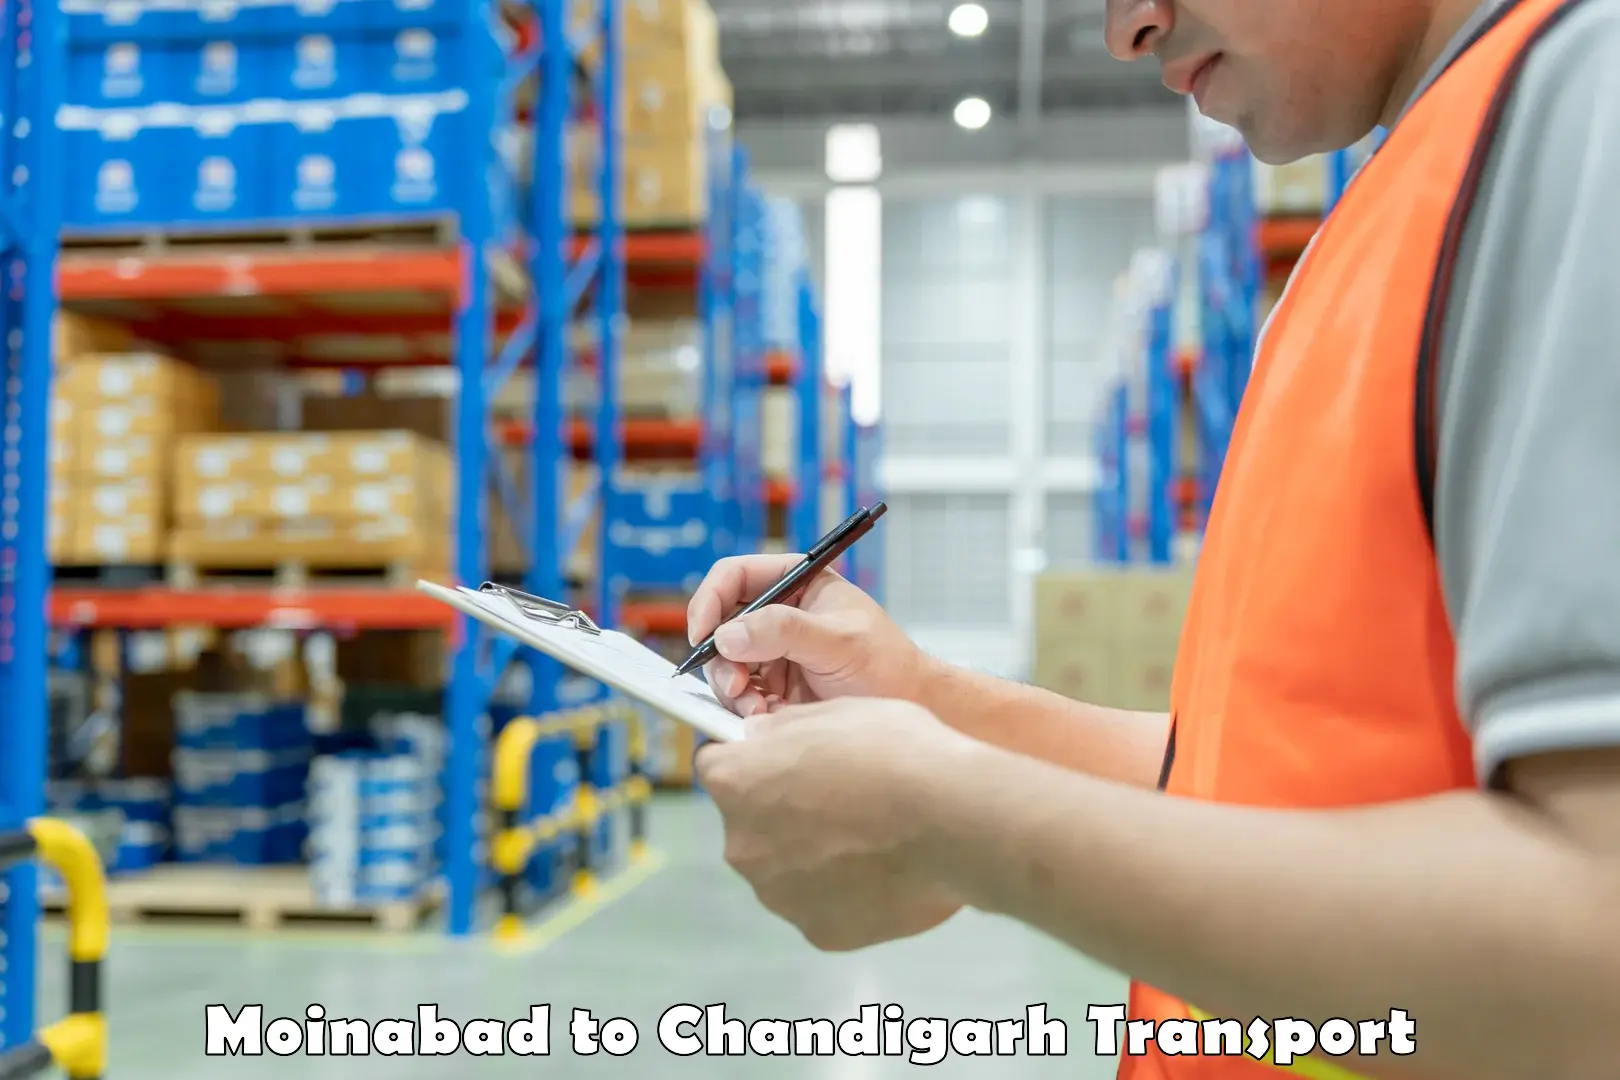 Furniture transport service Moinabad to Chandigarh